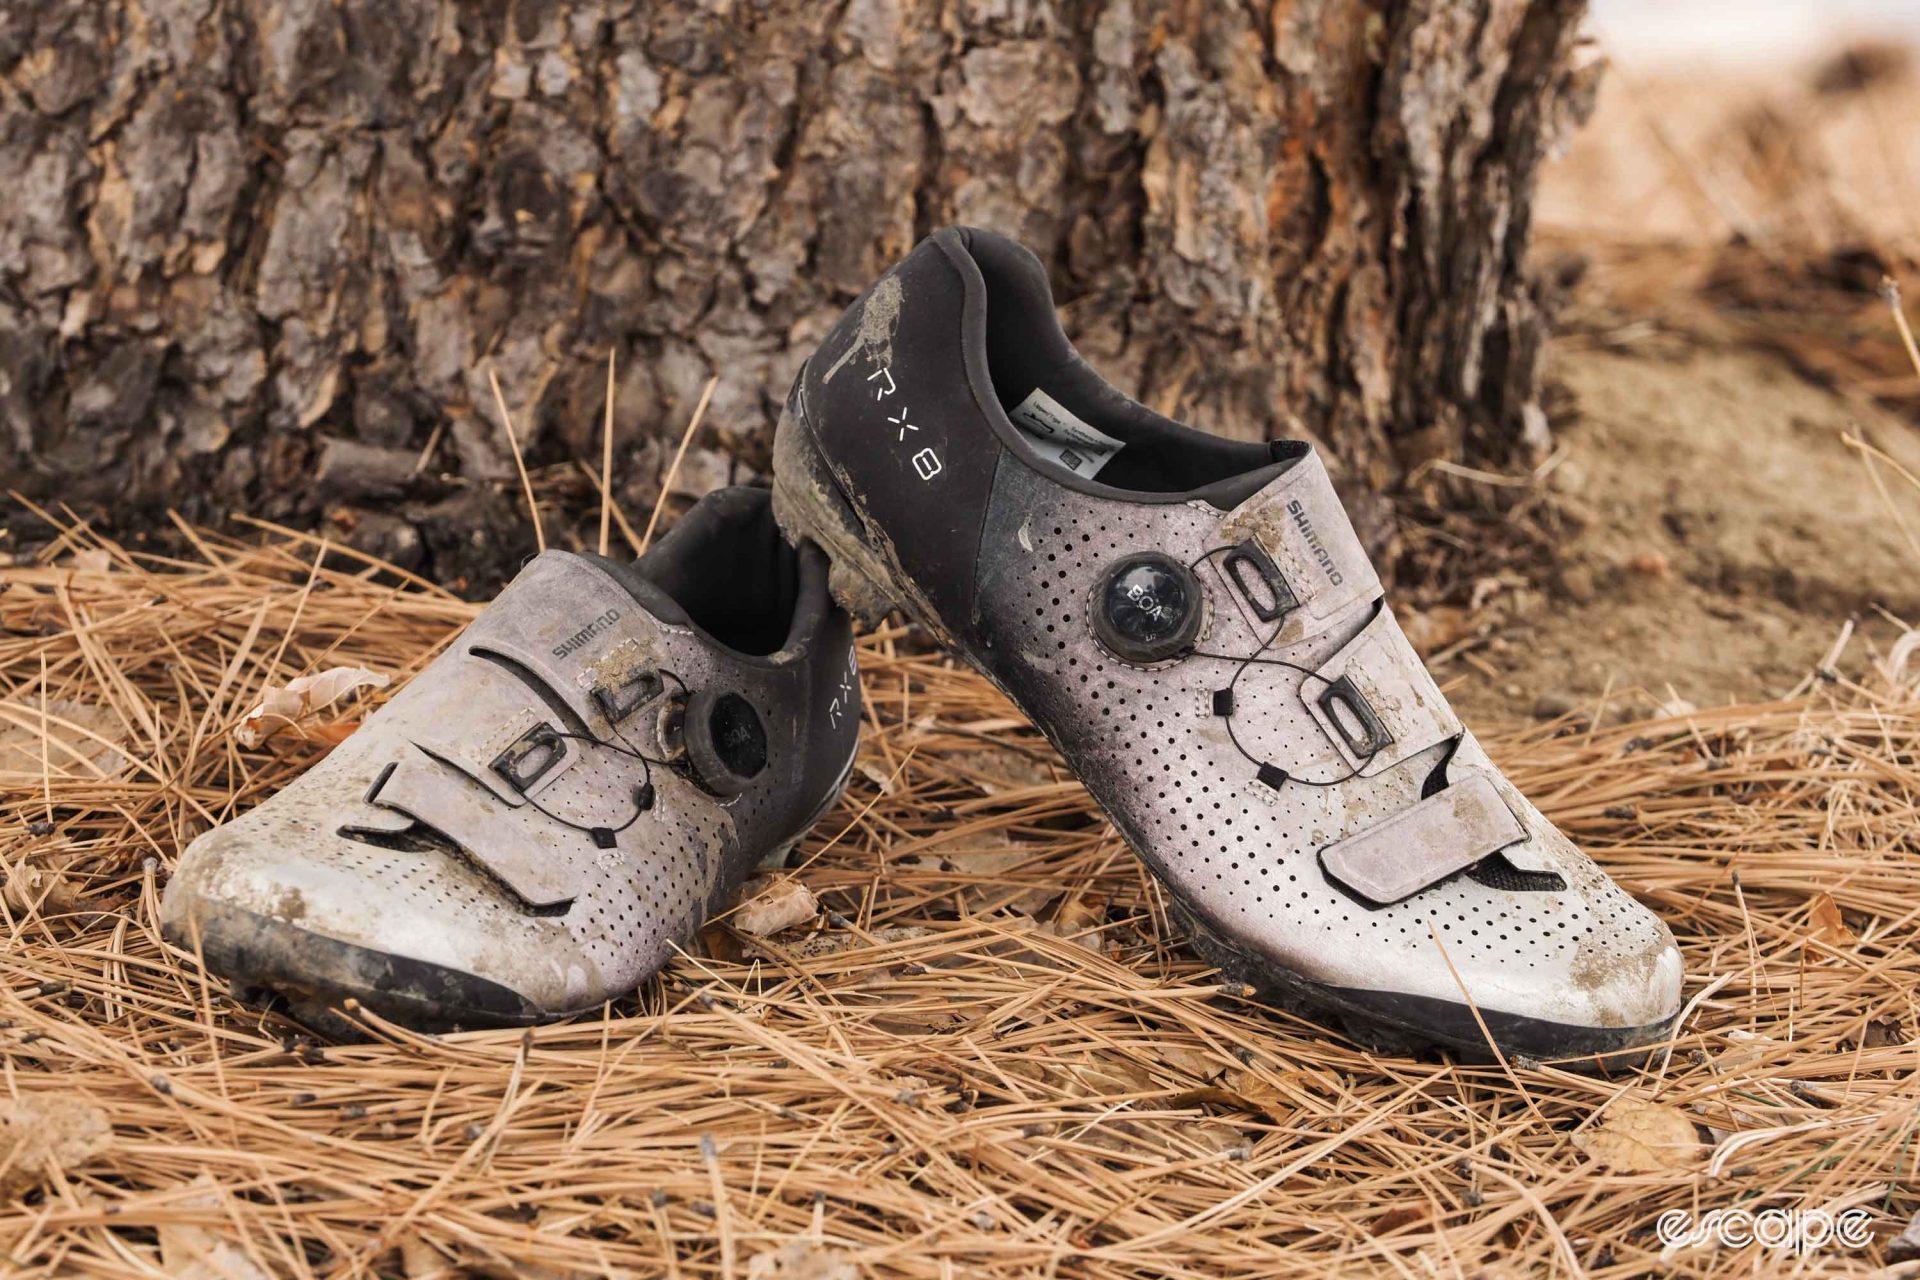 Shimano RX8 gravel shoes in pine needles